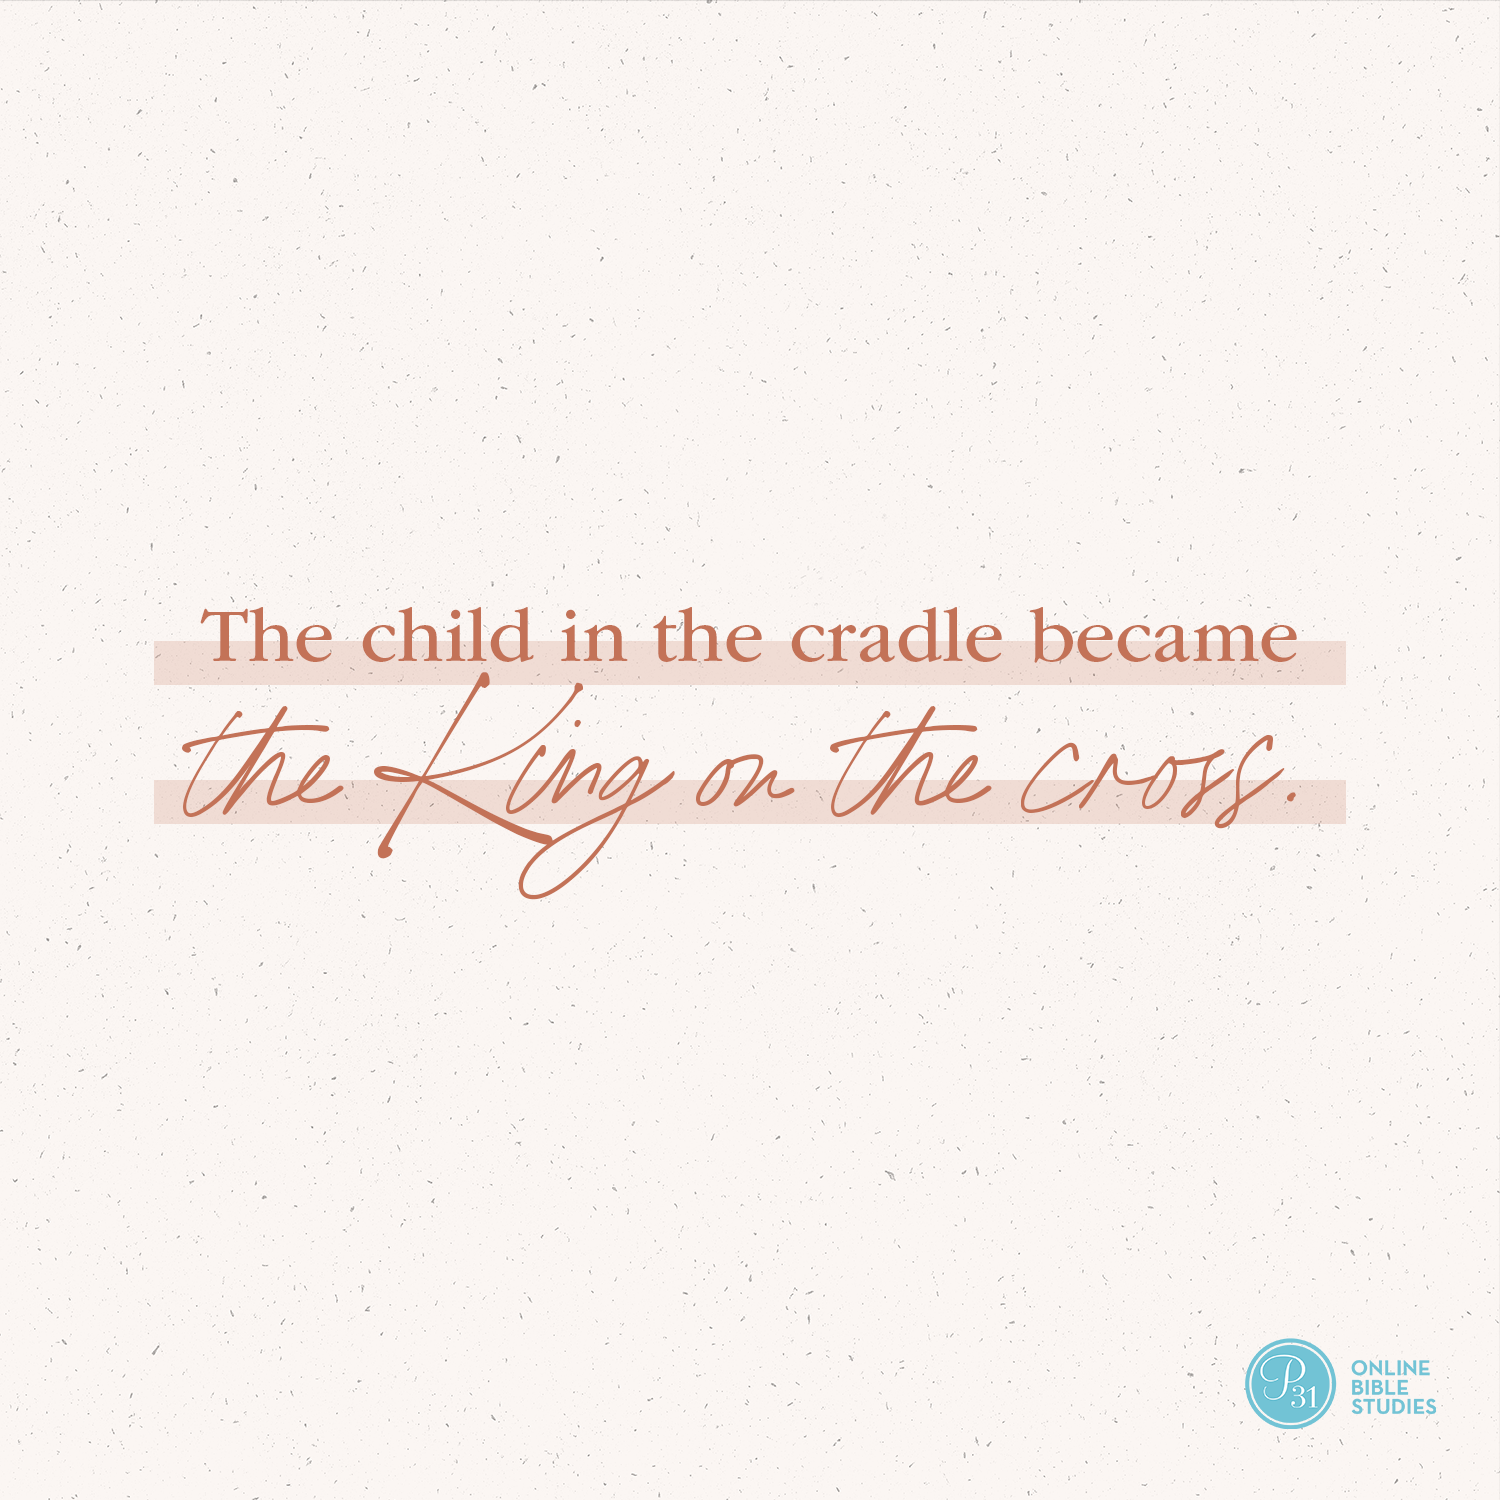 “The child in the cradle became the King on the cross.” - Max Lucado  #BecauseOfBethlehem | Proverbs 31 Online Bible Studies Week 1 #P31OBS